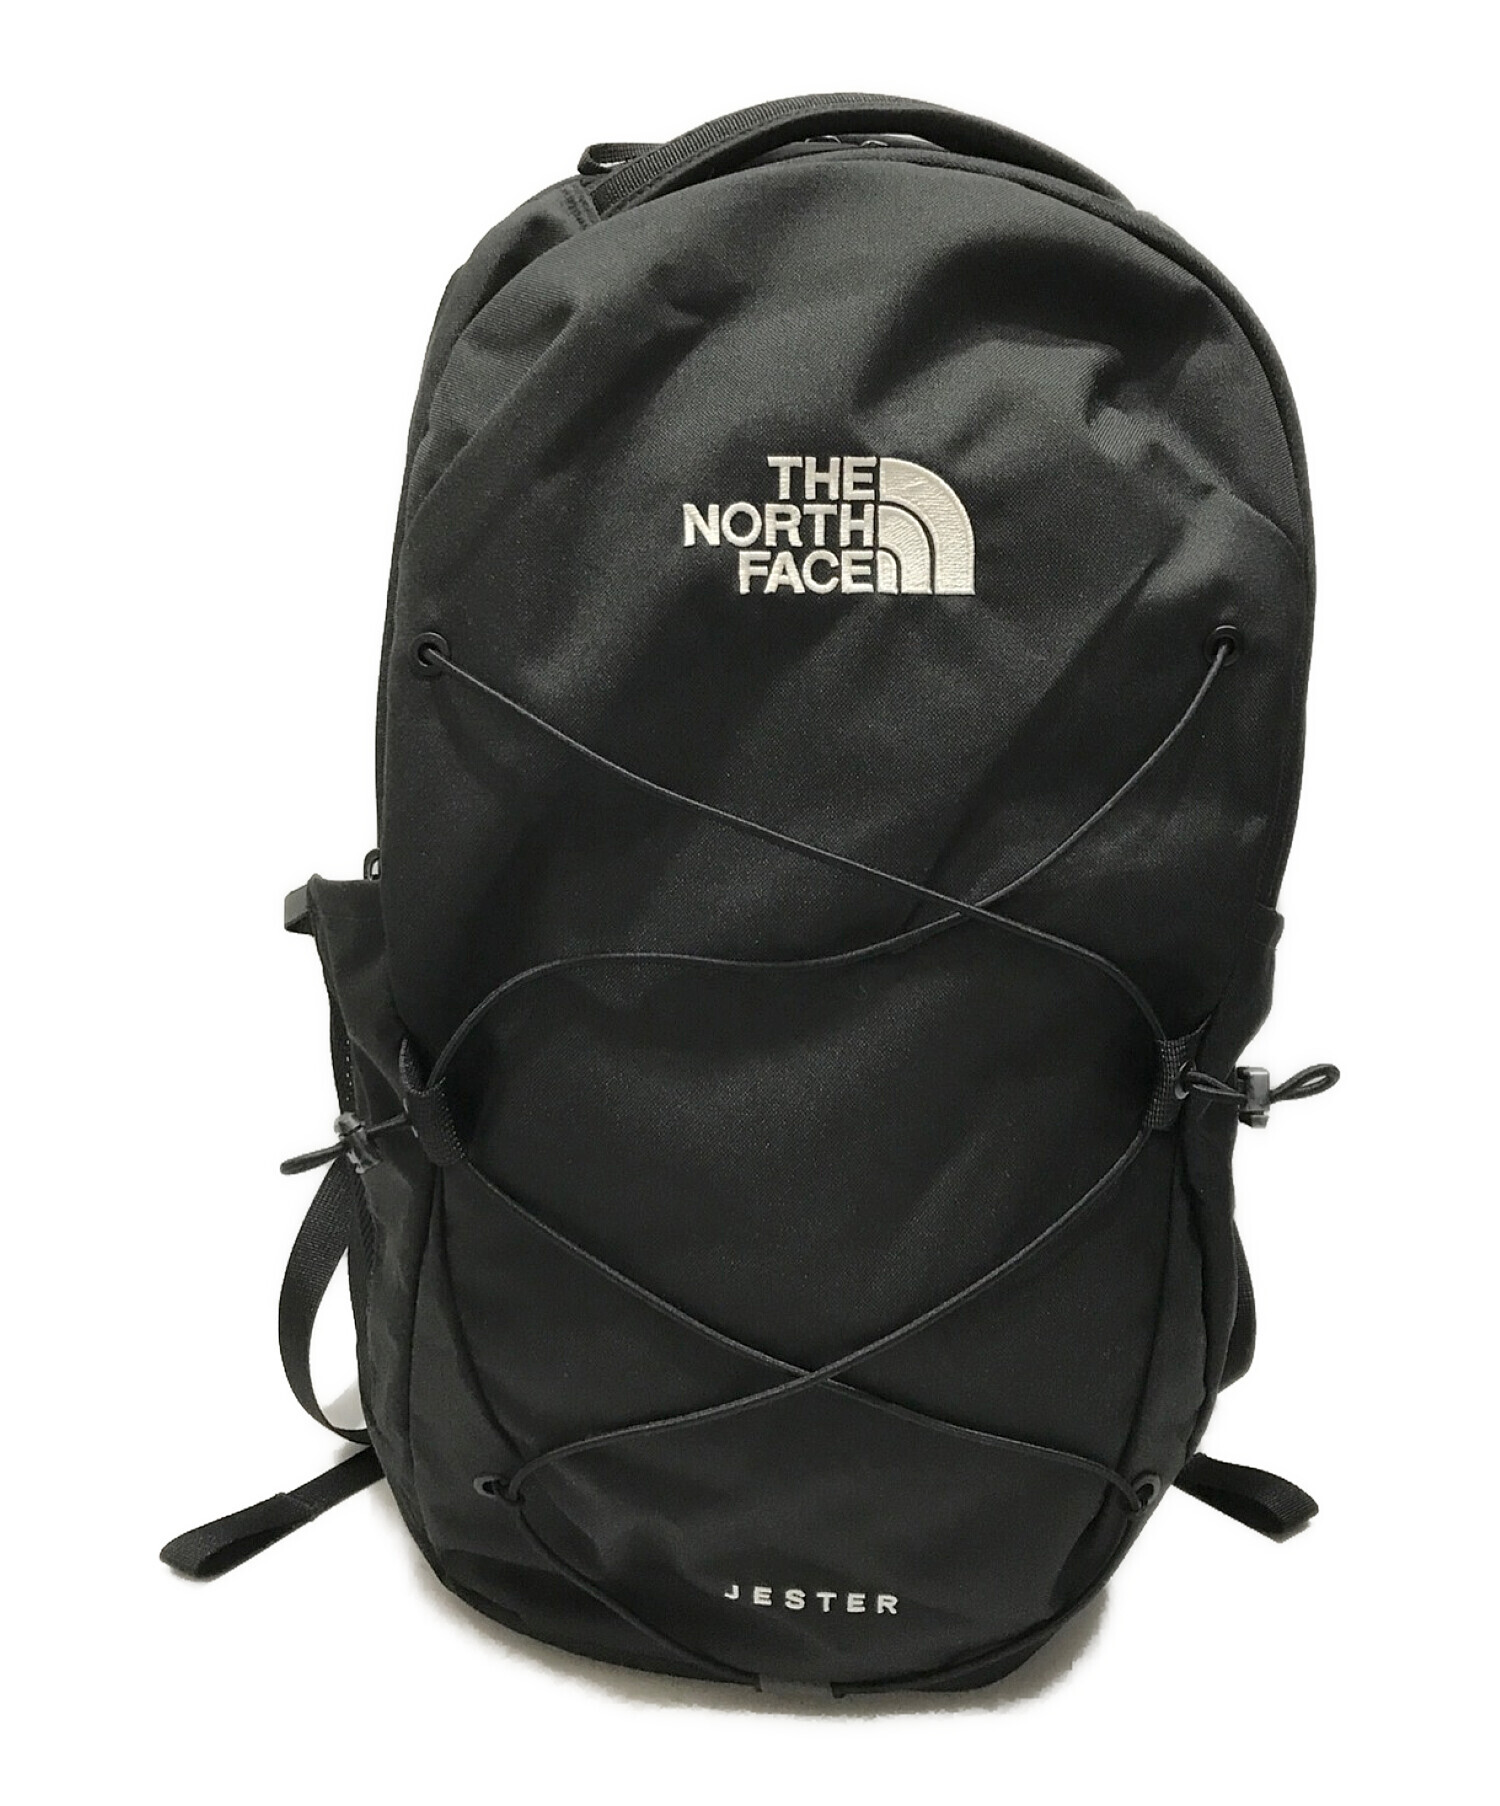 USED ユーズド　THE NORTH FACE JESTER リュック　鞄